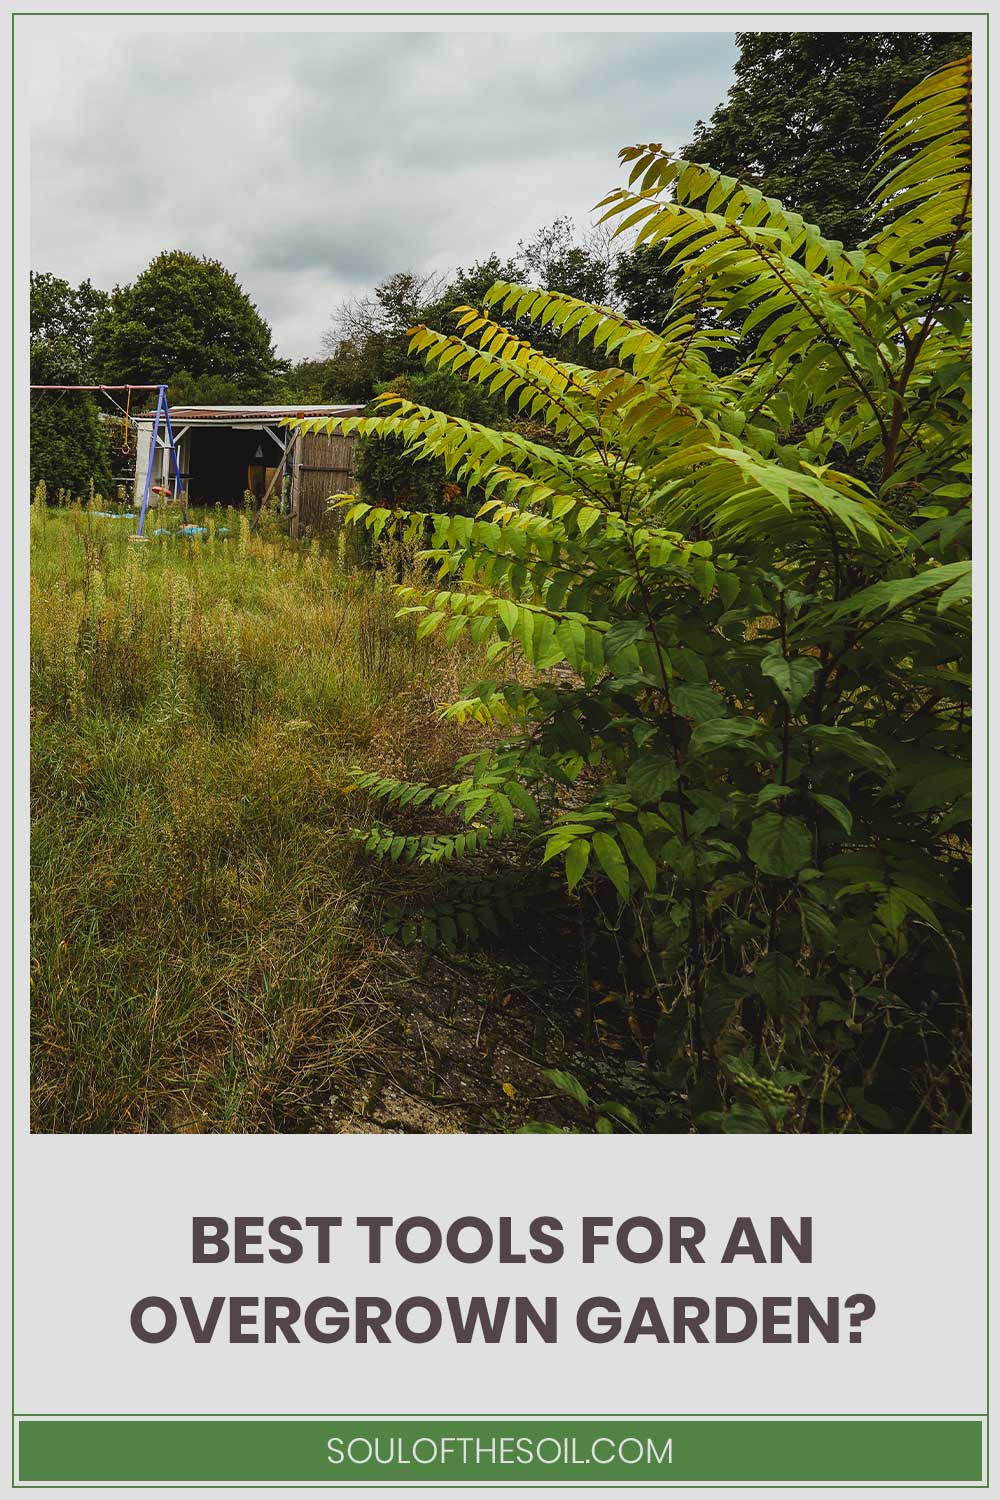 A garden with tall grass and plants - Best Tools For An Overgrown Garden.